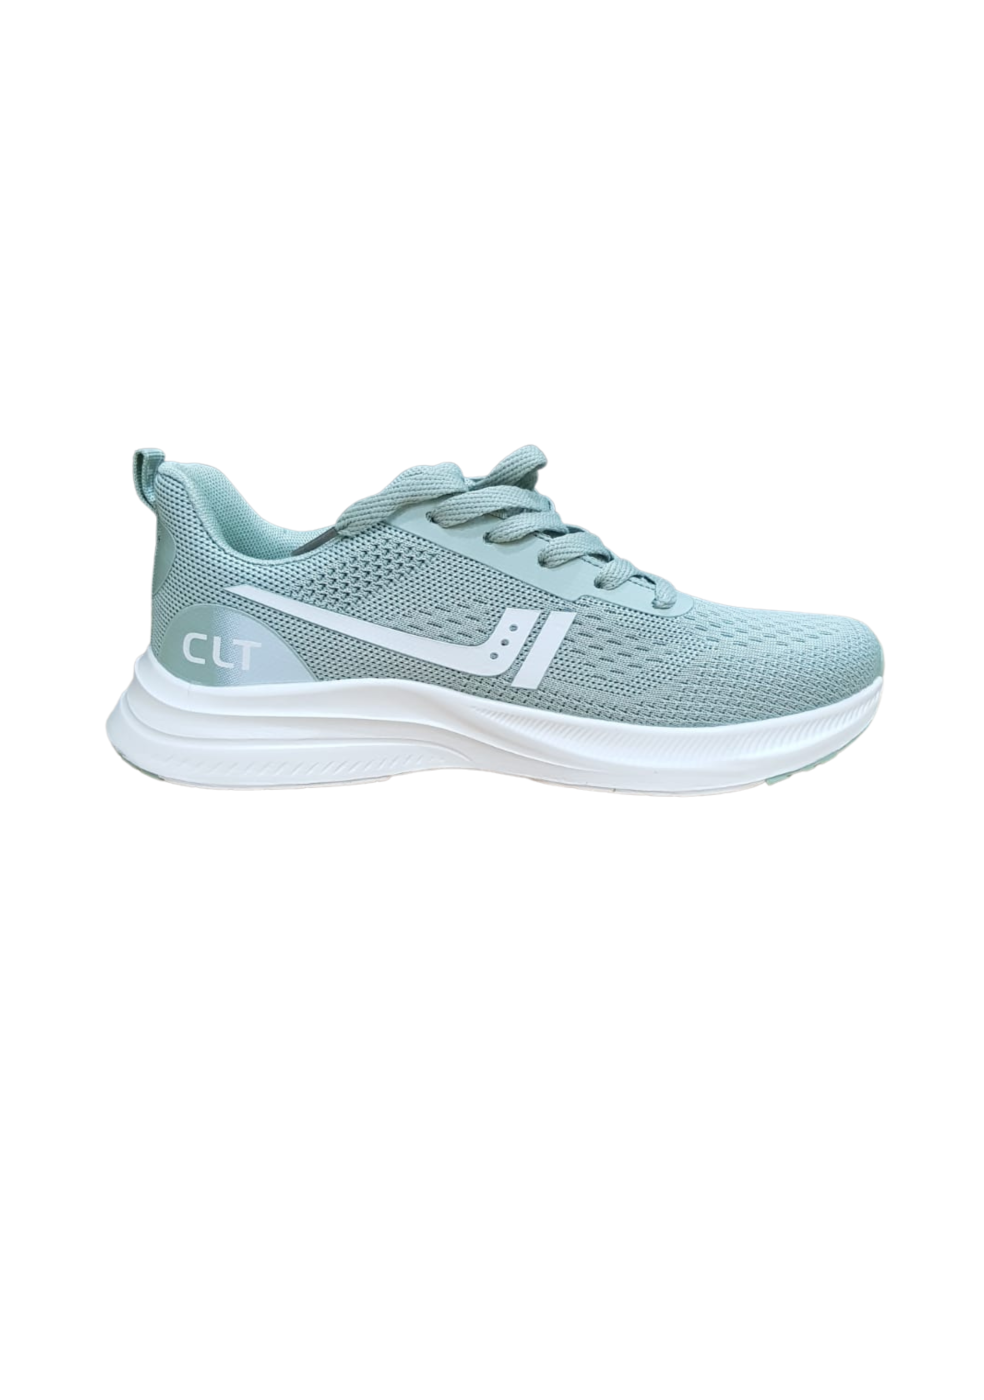 Sports Shoes For Women